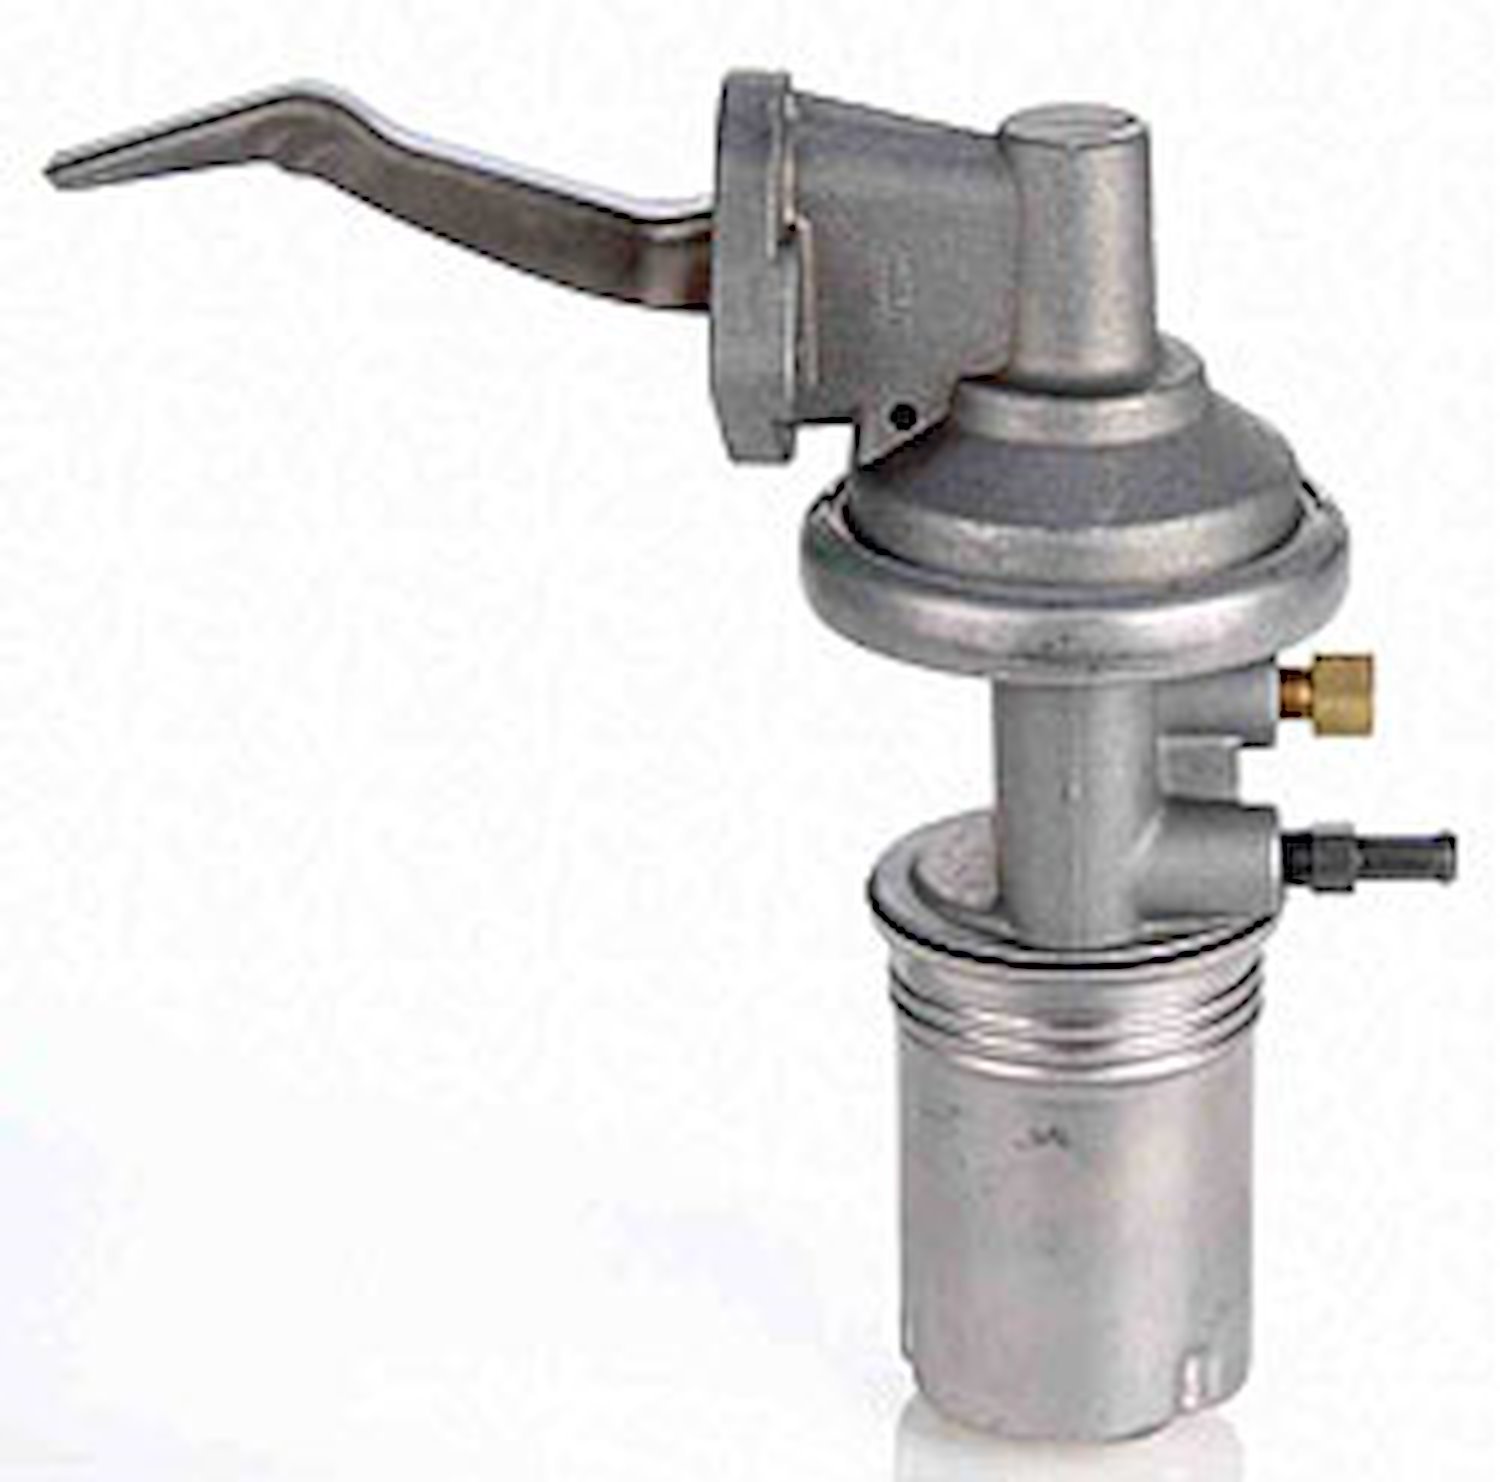 Mechanical Fuel Pump for 1958-1969 Ford 292, 352,